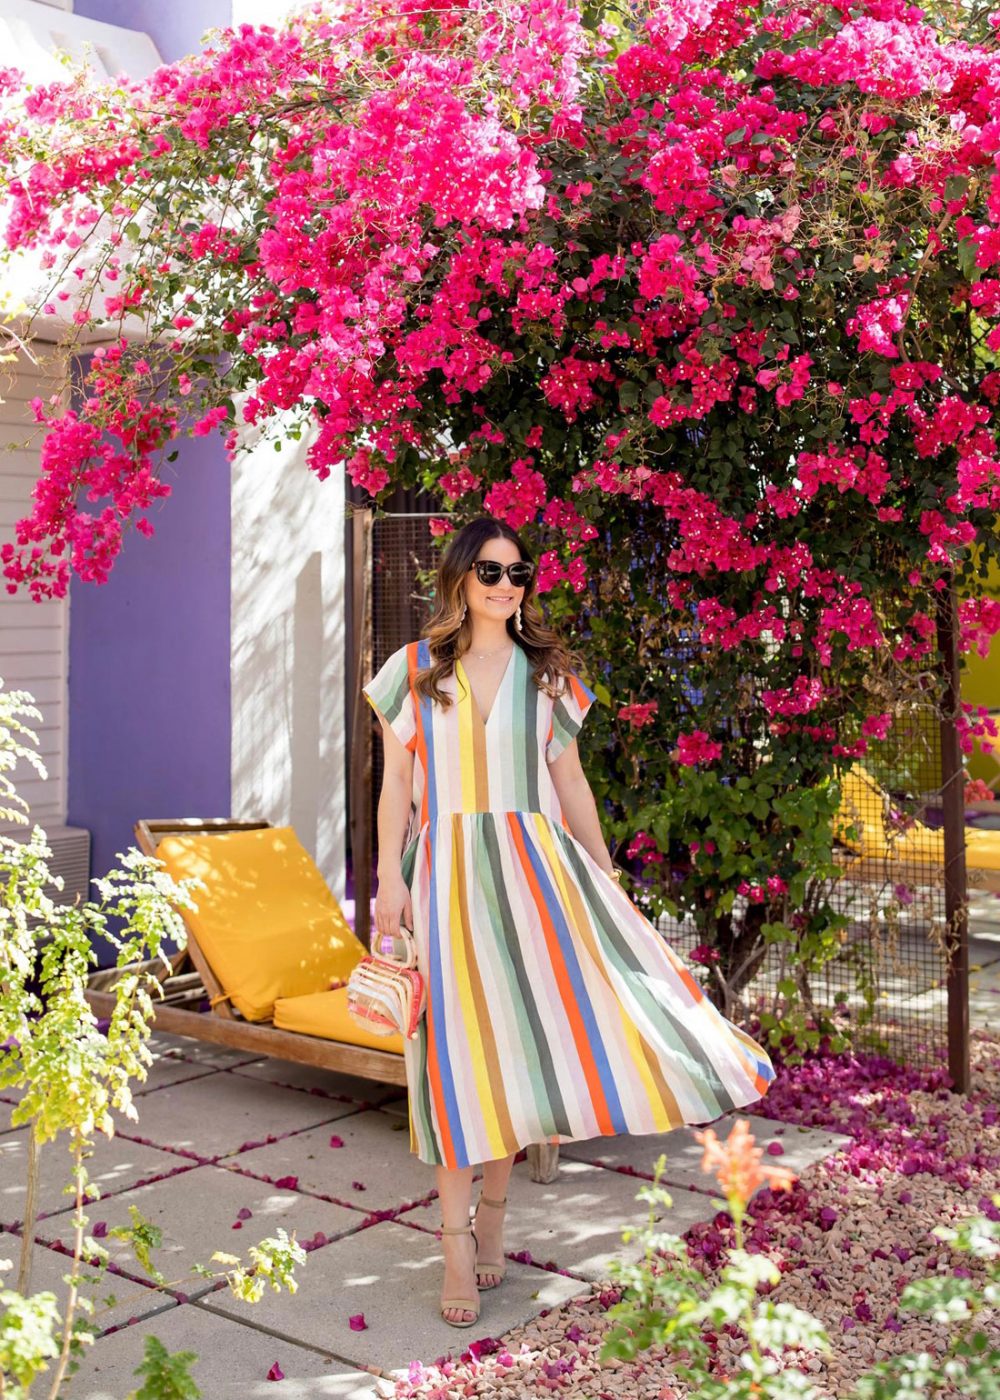 Whit Two Colorful Striped Dress